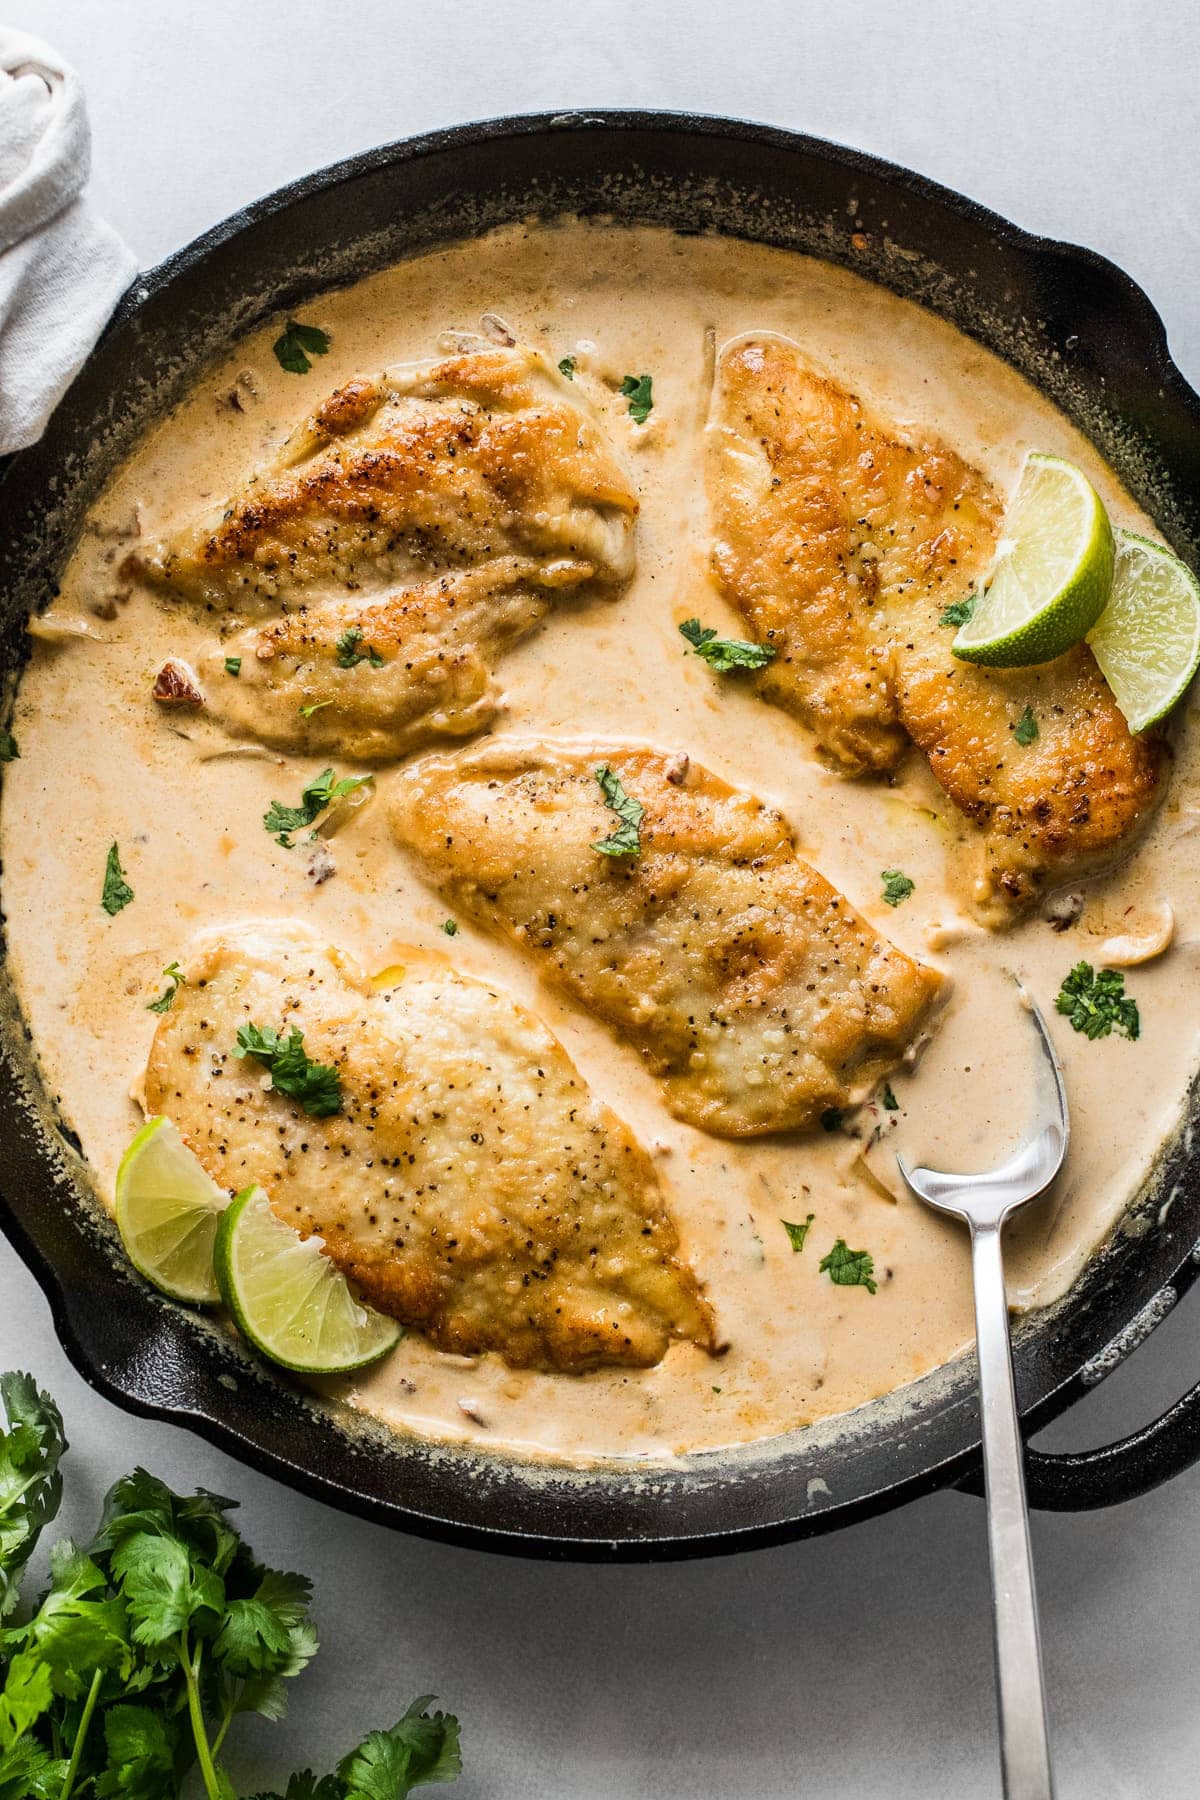 Pollo en Chipotle (Creamy Chipotle Chicken) in a skillet topped with cilantro and lime wedges.